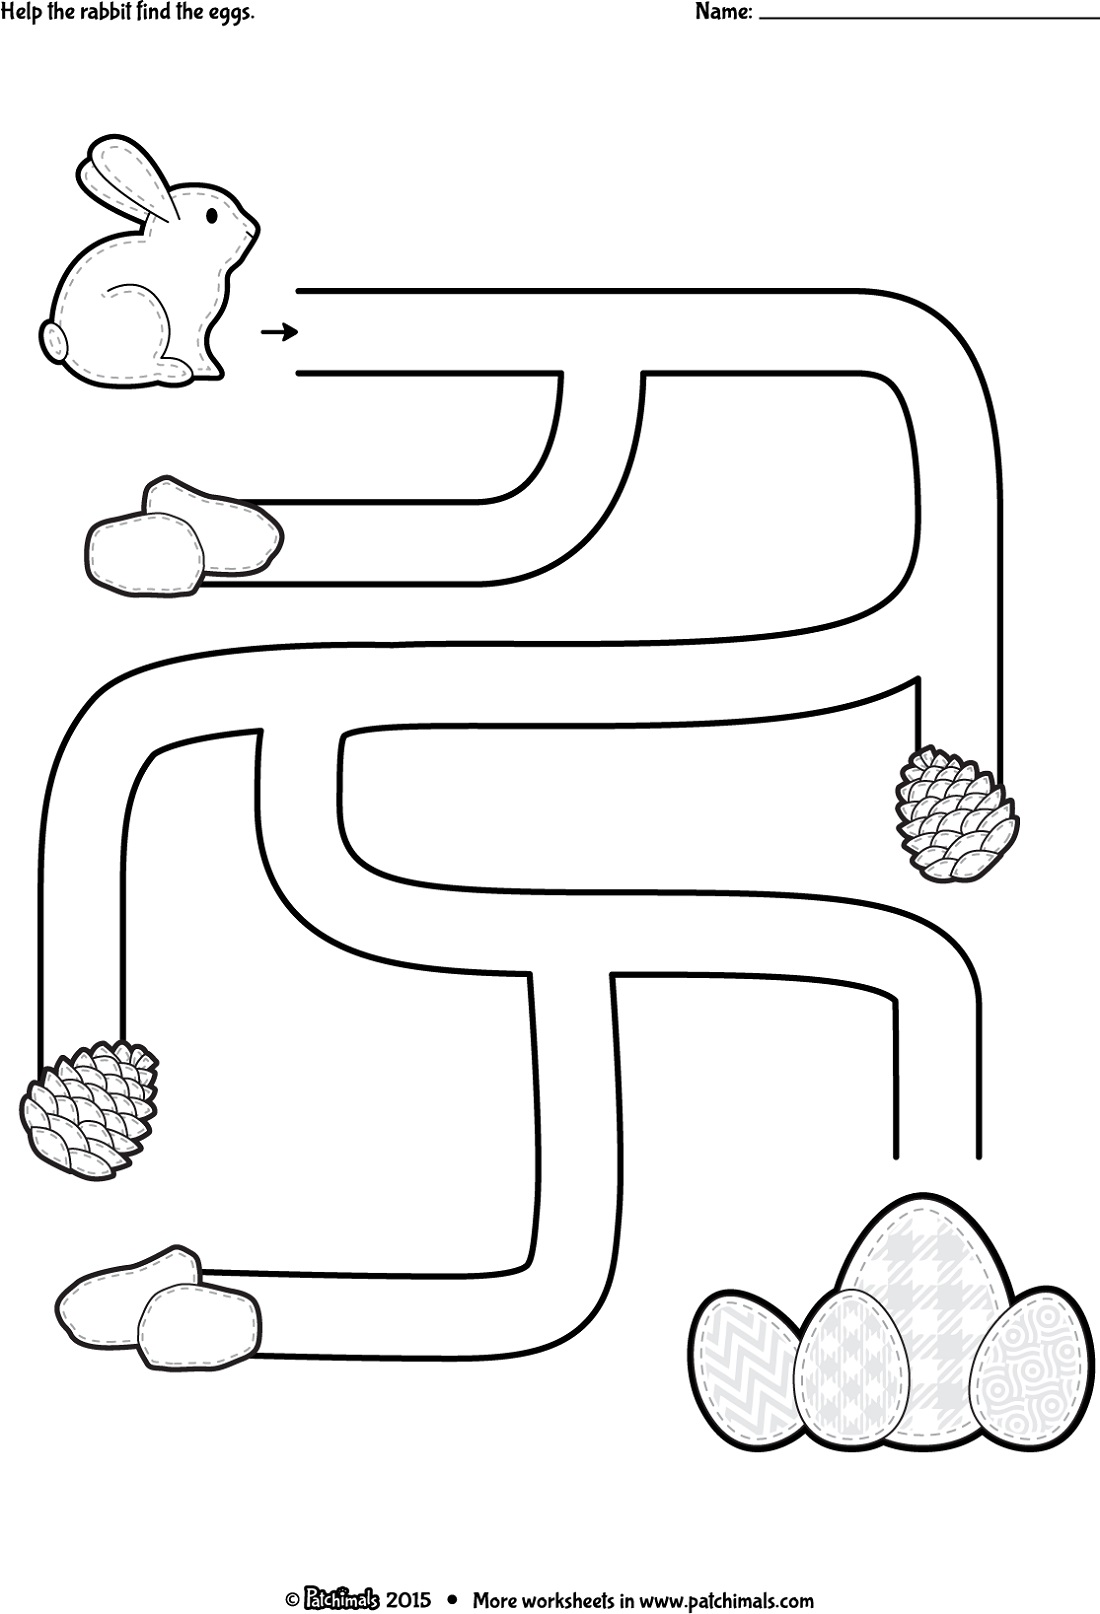 Printable Activities For 4 Year Olds Easy Maze